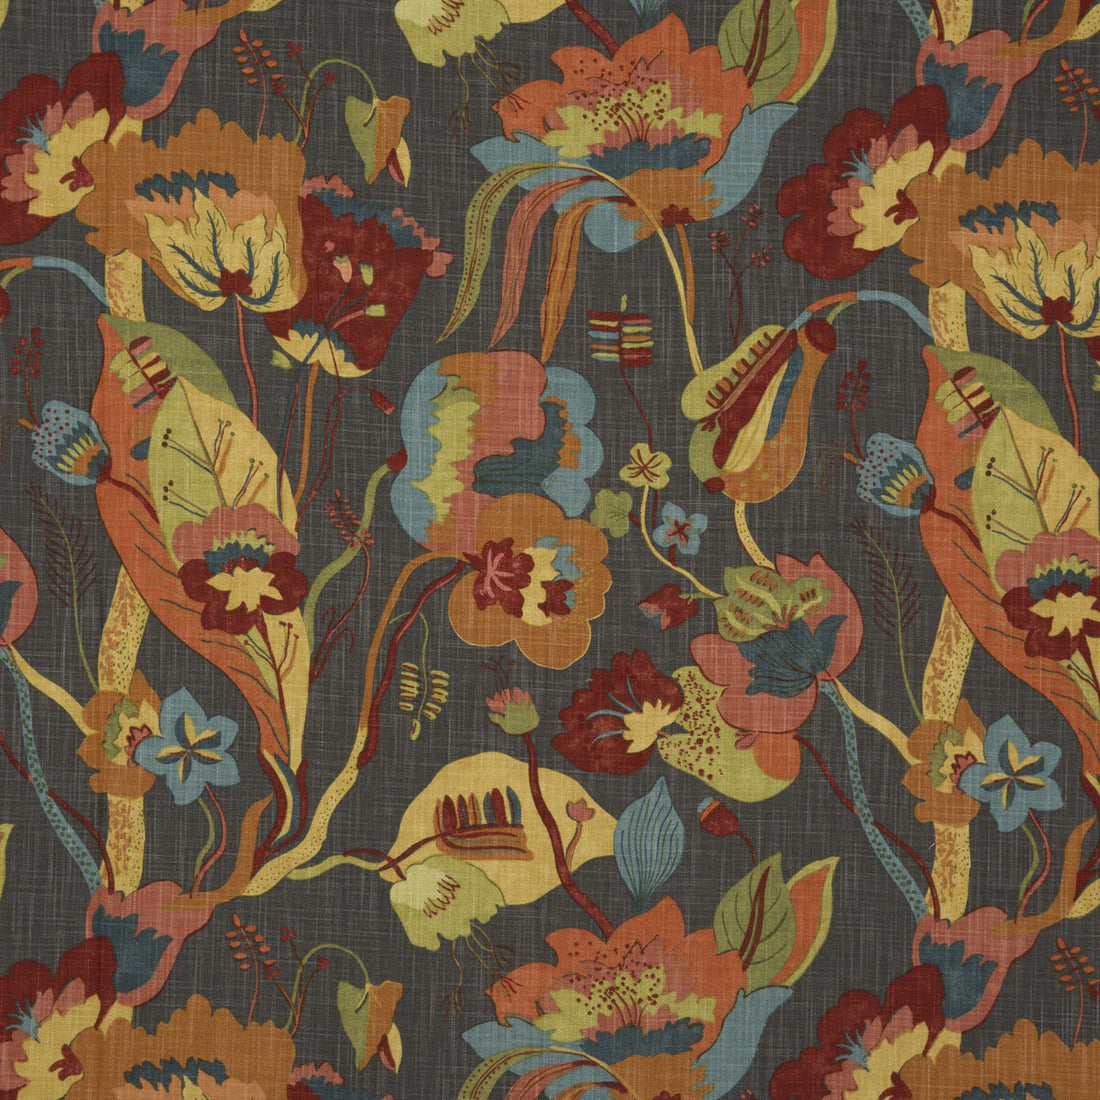 California fabric in spice/charcoal color - pattern BP10631.1.0 - by G P &amp; J Baker in the Specials Book collection